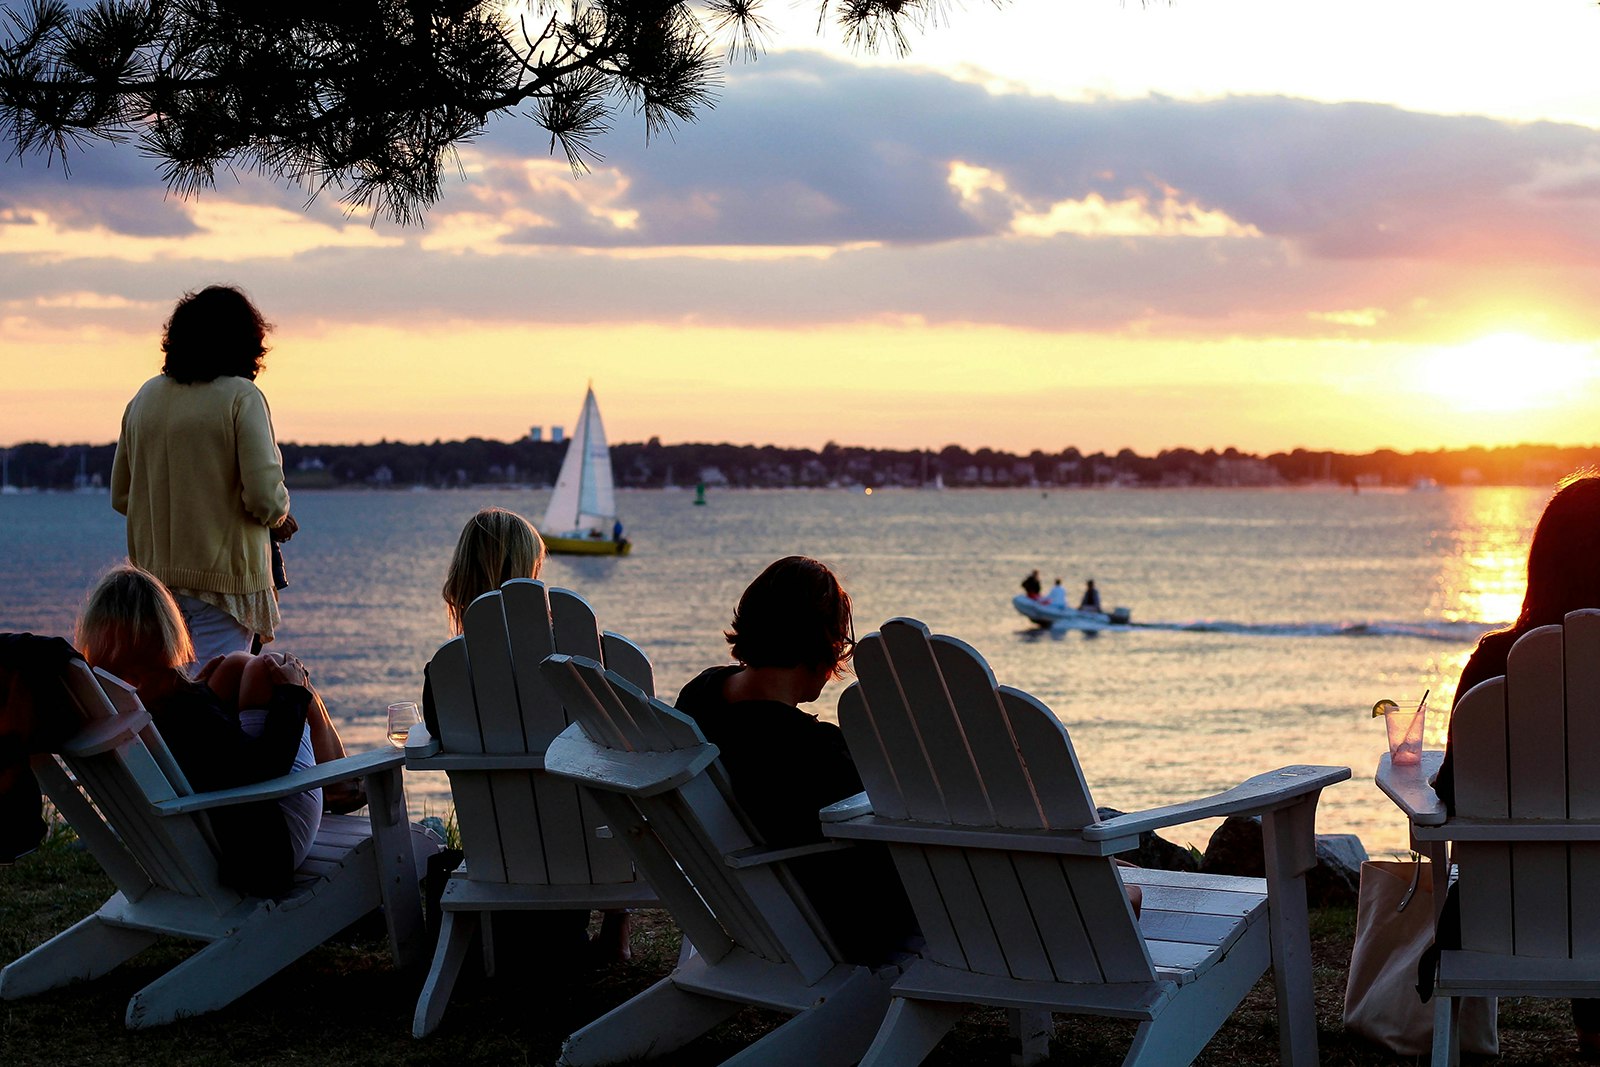 People sit in adirondack chairs on the beach in Rhode Island's Narragansett Bay, as the sun sets © Anna Saxon / Lonely Planet